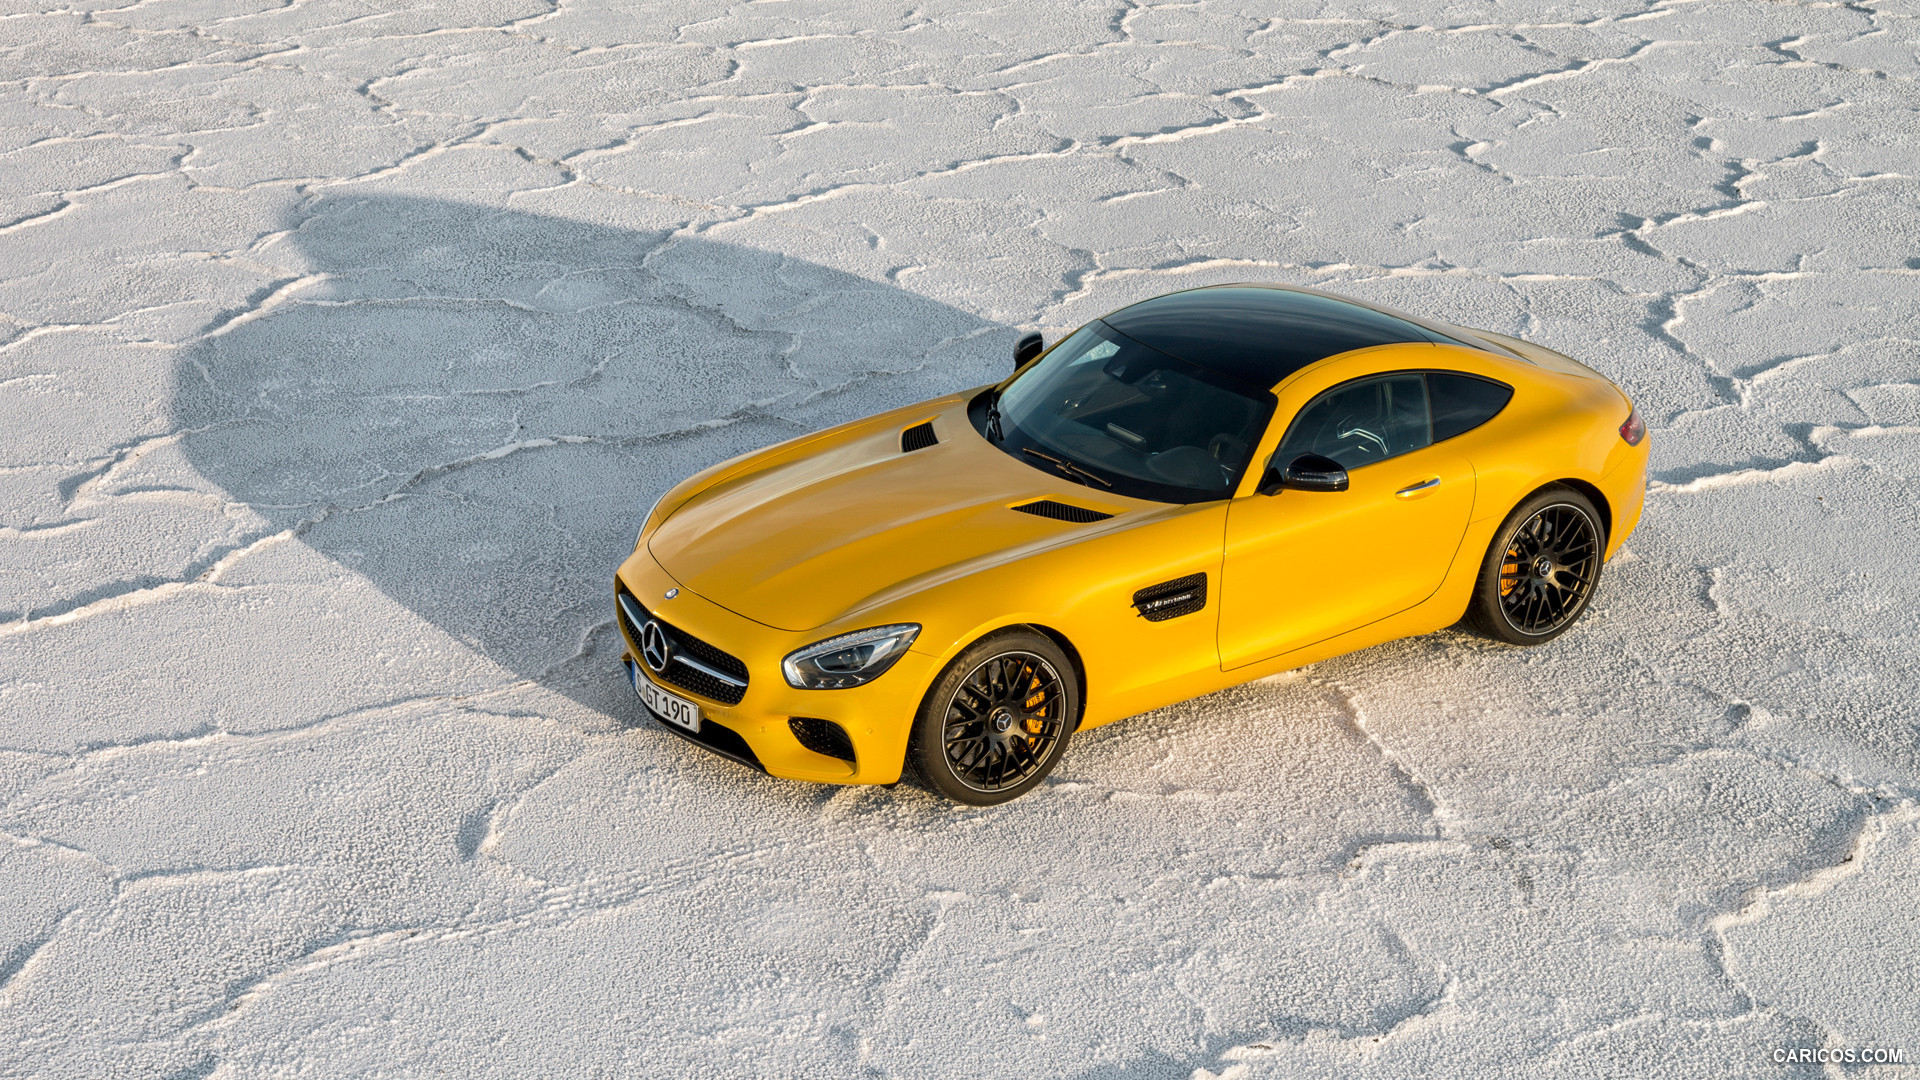 2016 Mercedes-AMG GT (Solarbeam) - Top, #69 of 190